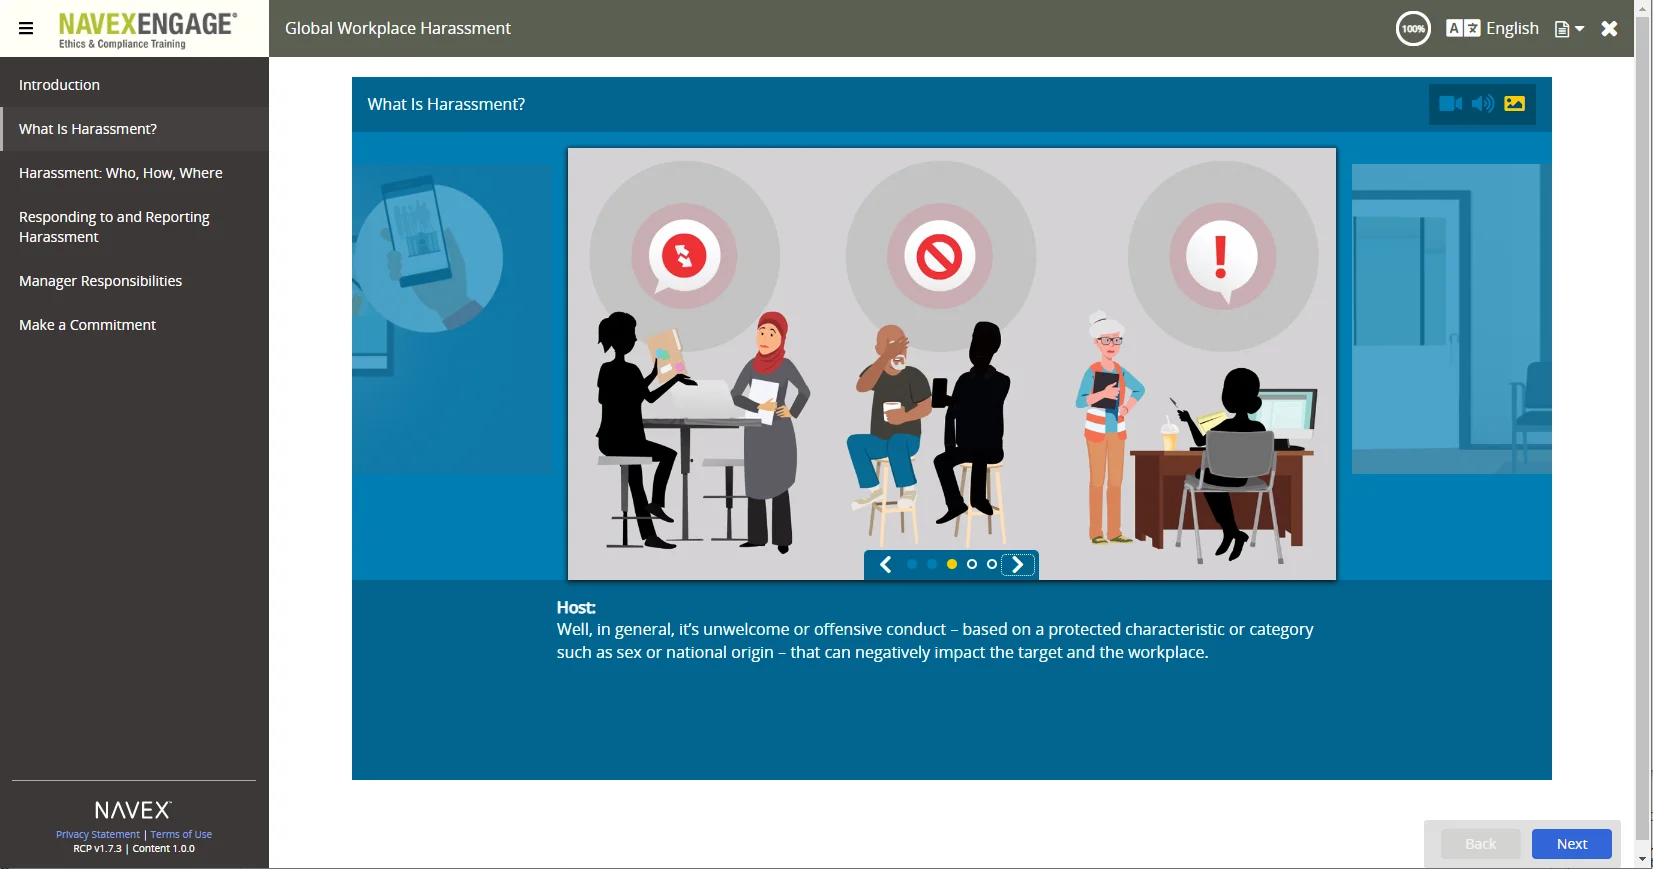 Global Workplace Harassment NAVEX image